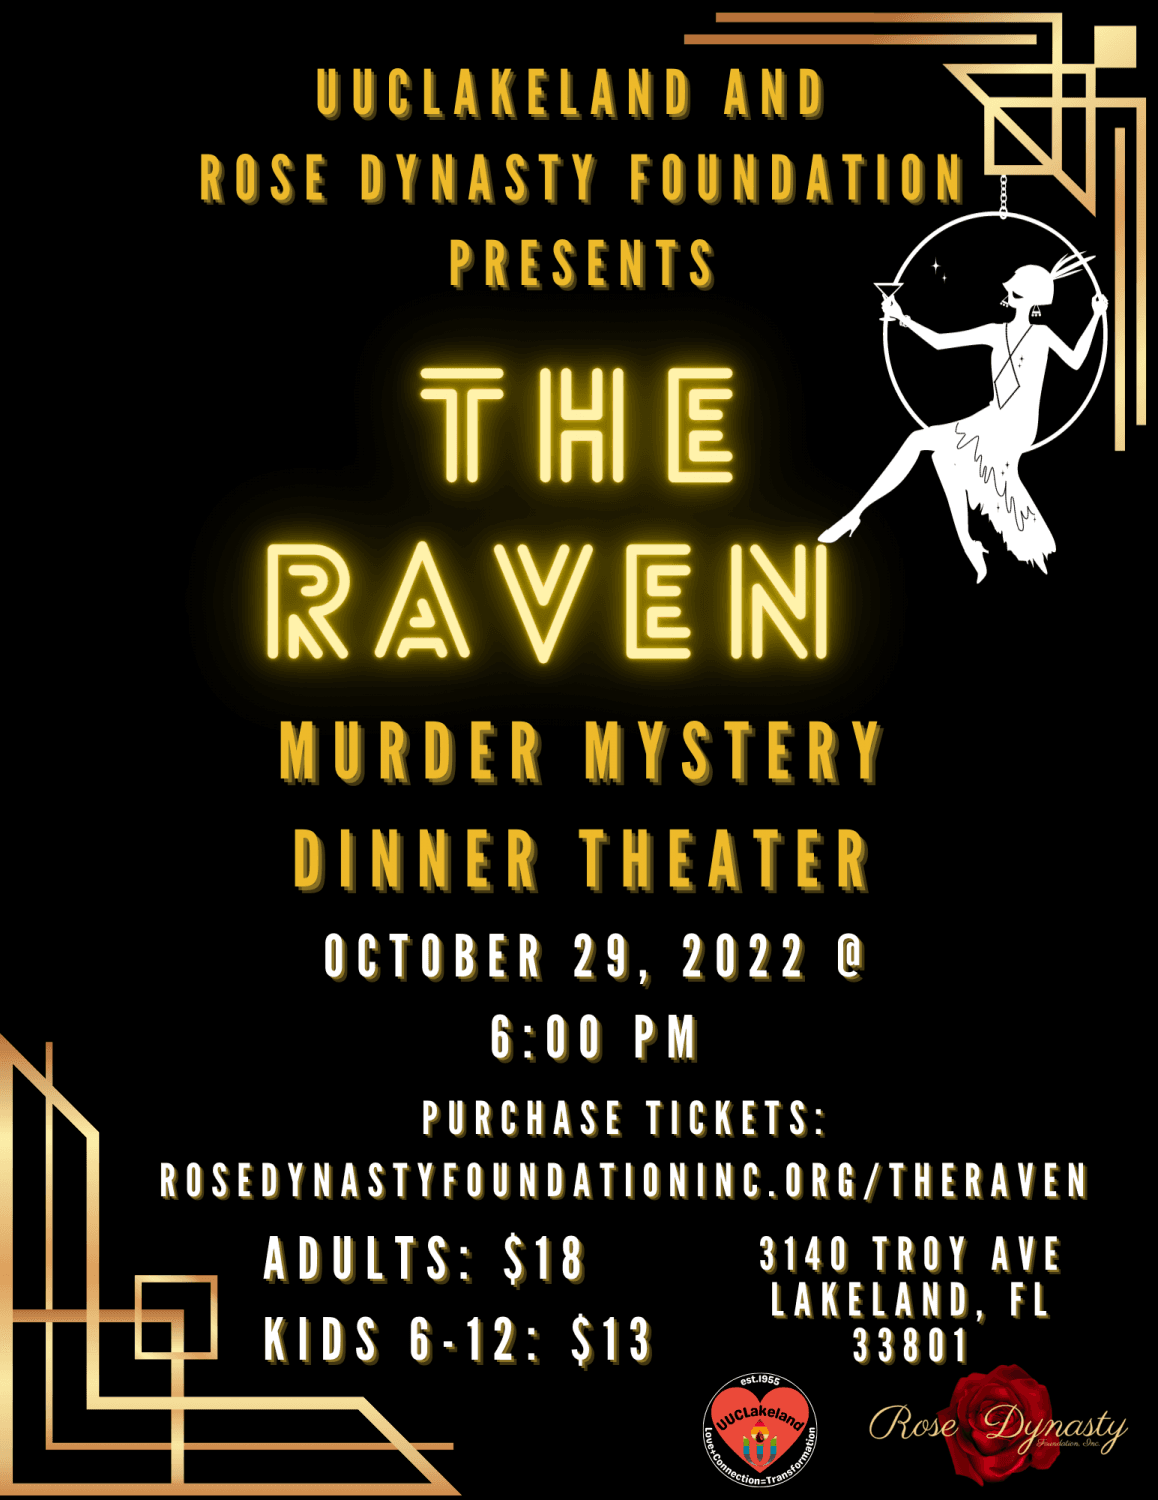 The Raven Murder Mystery Dinner Theater
Sat Oct 29, 6:00 PM - Sat Oct 29, 10:00 PM
in 10 days